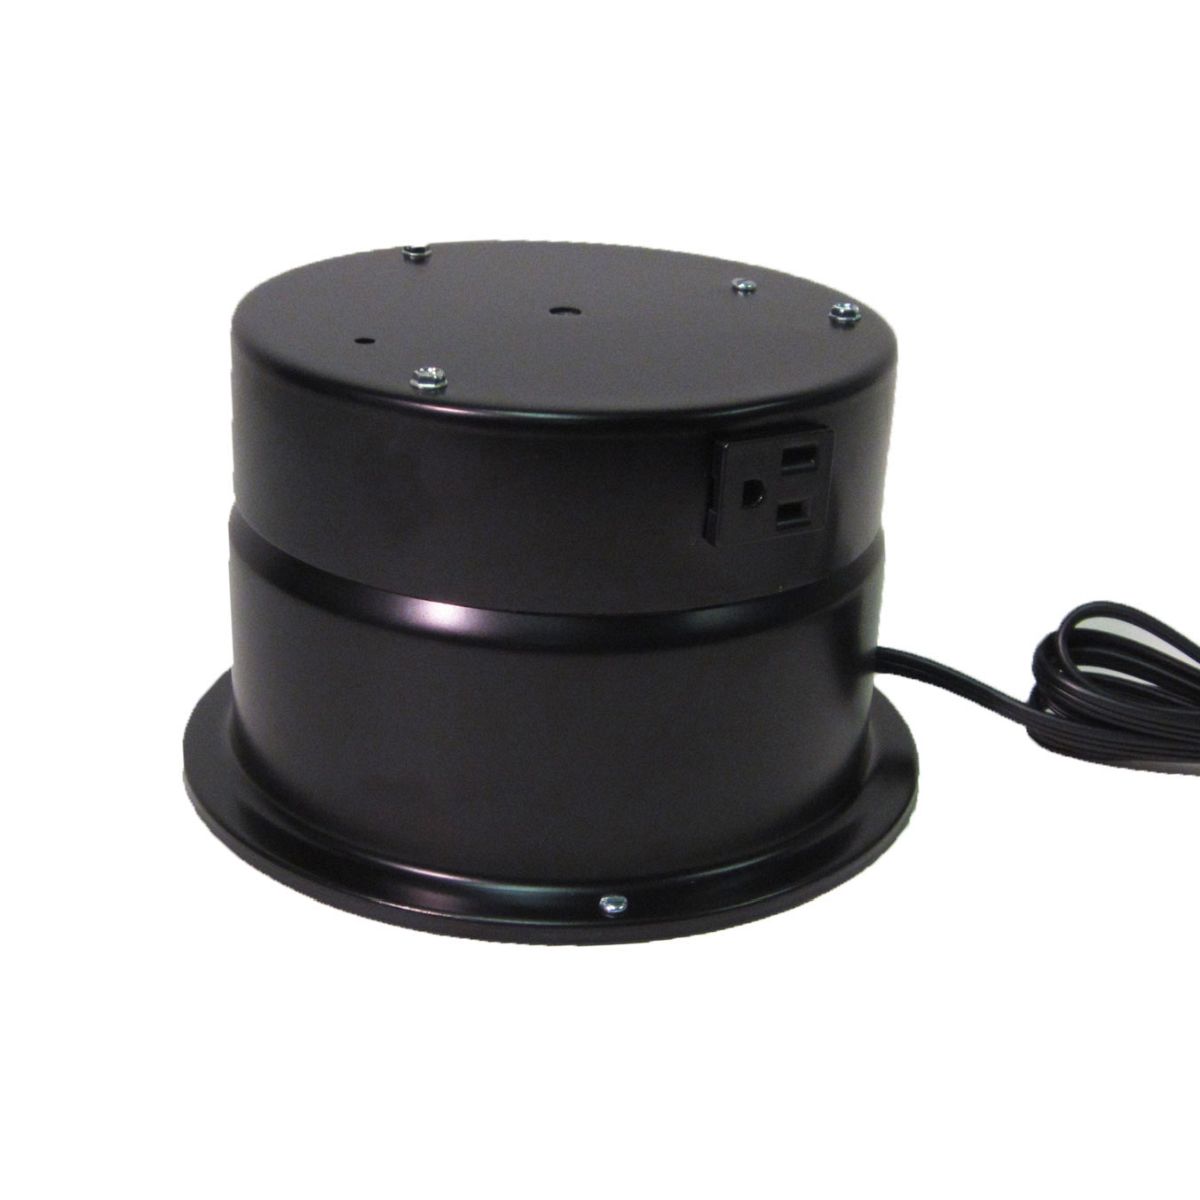 Motorized Display Turntable w/ 8 amp Outlet - 50 lb Cap (MB110E8)